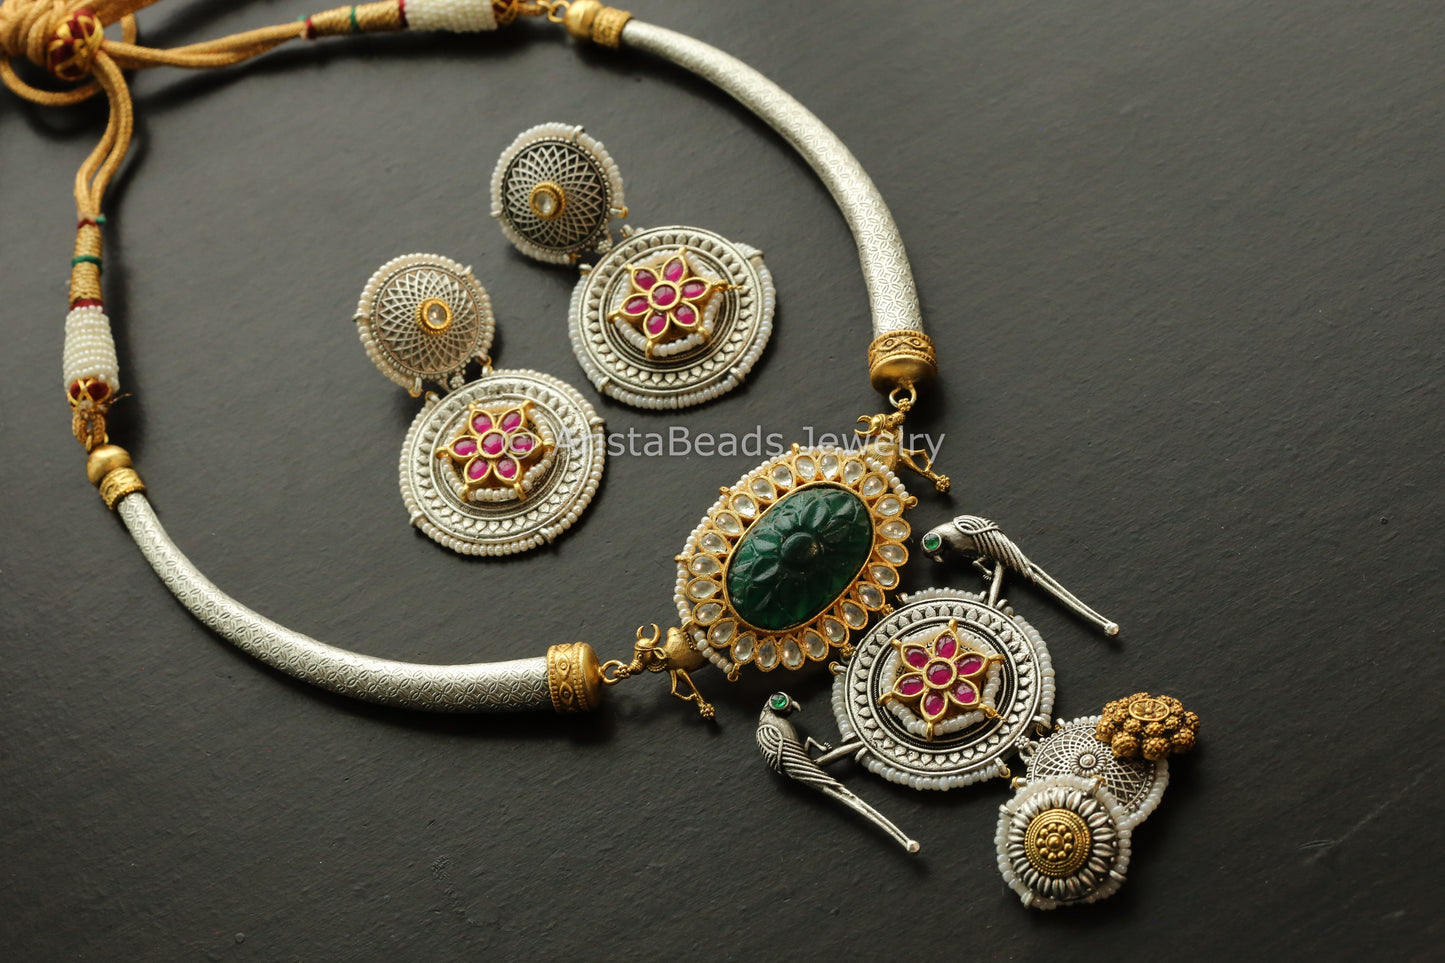 Real Silver Look Alike Kundan Hasli Necklace - Green Carved Stone